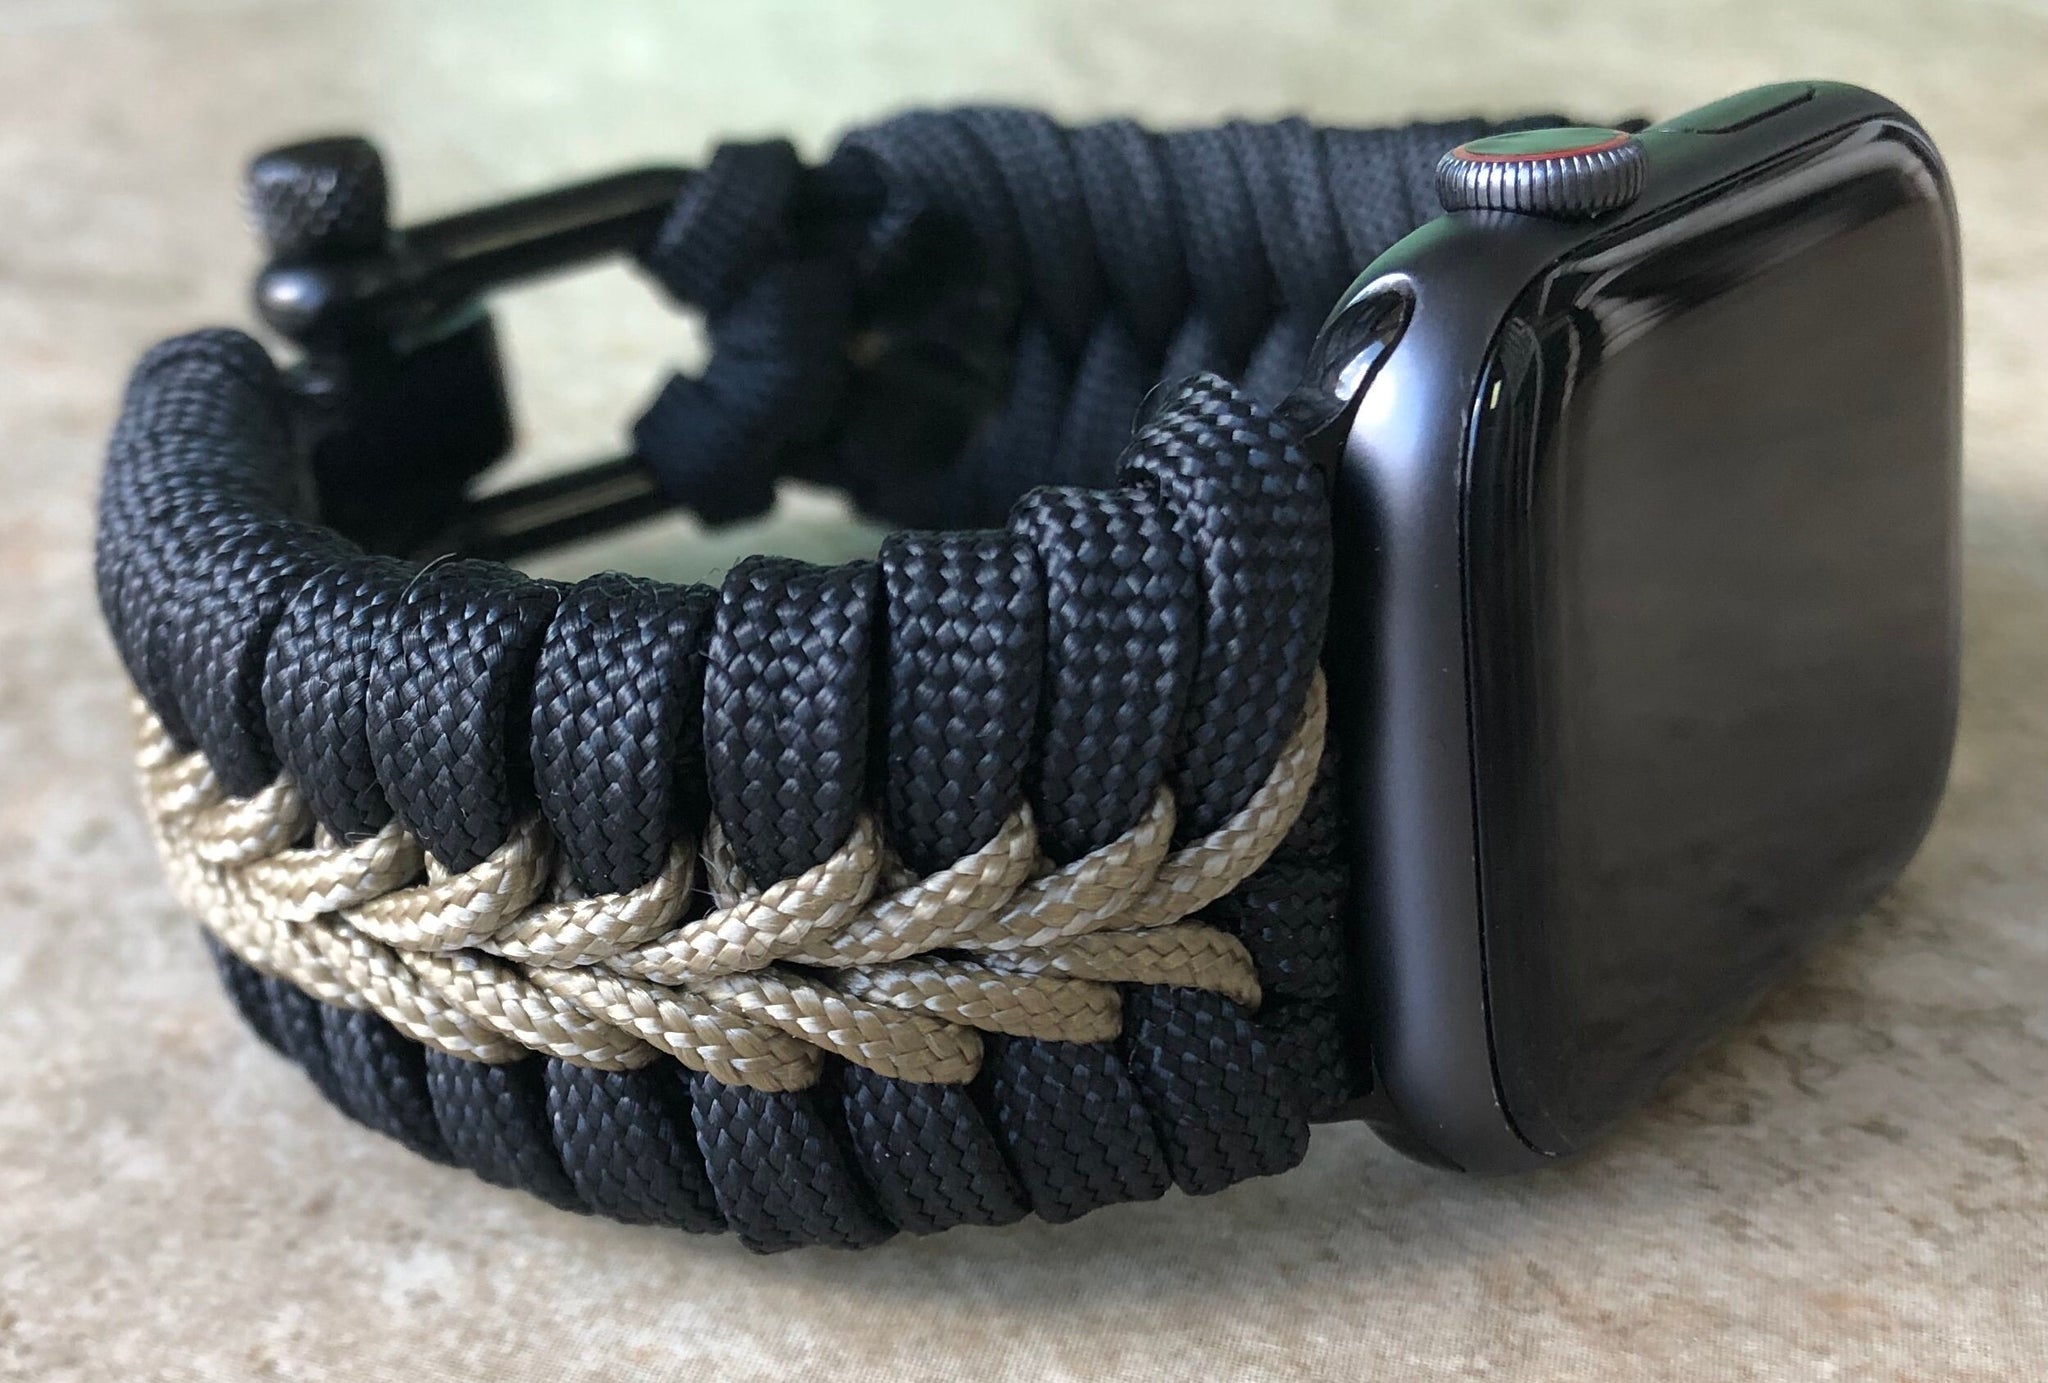 Cording2U Paracord Watch Band for Apple Watch Series 1, 2, 3, 4, 5, 6, 7, 8, 9, Ultra, Ultra 2, and SE (watch Not Included)